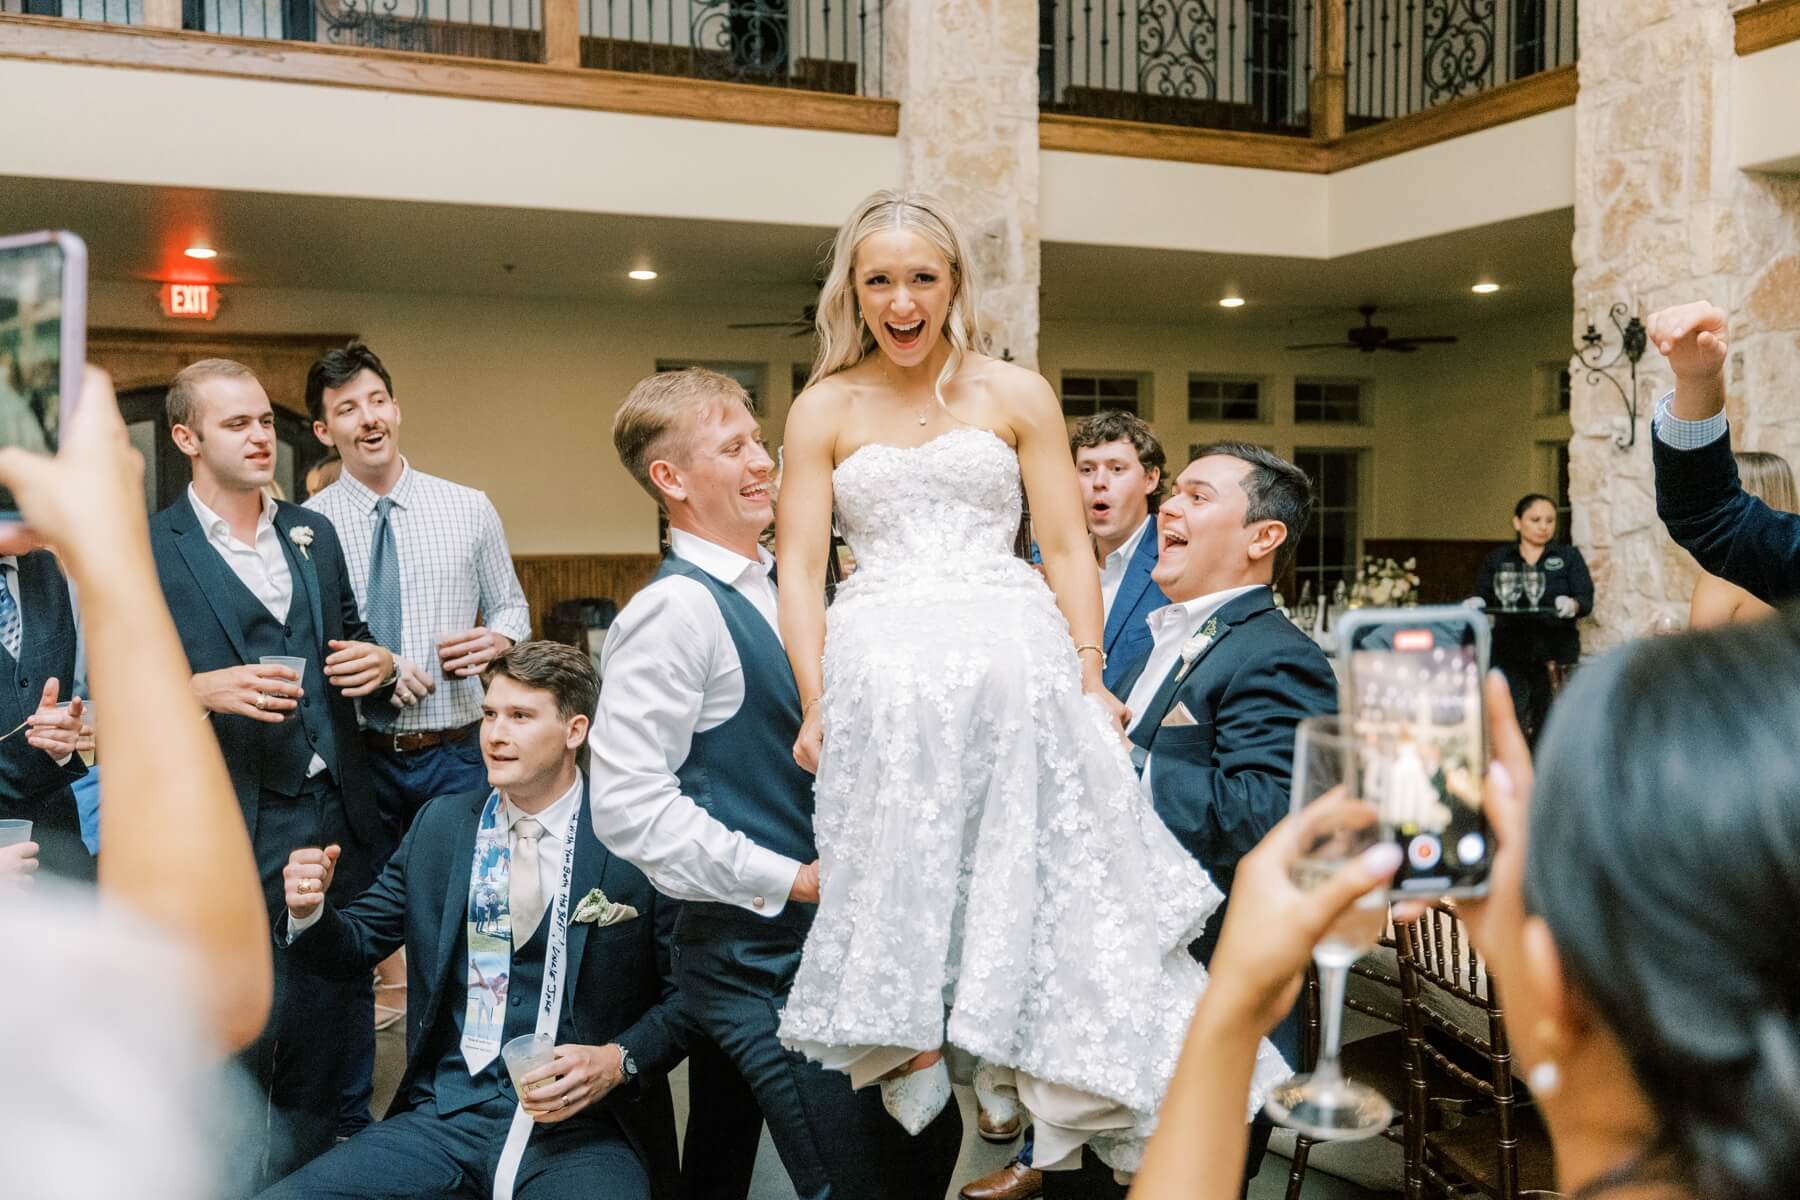 Bride being lifted on chair by groomsmen at wedding reception 